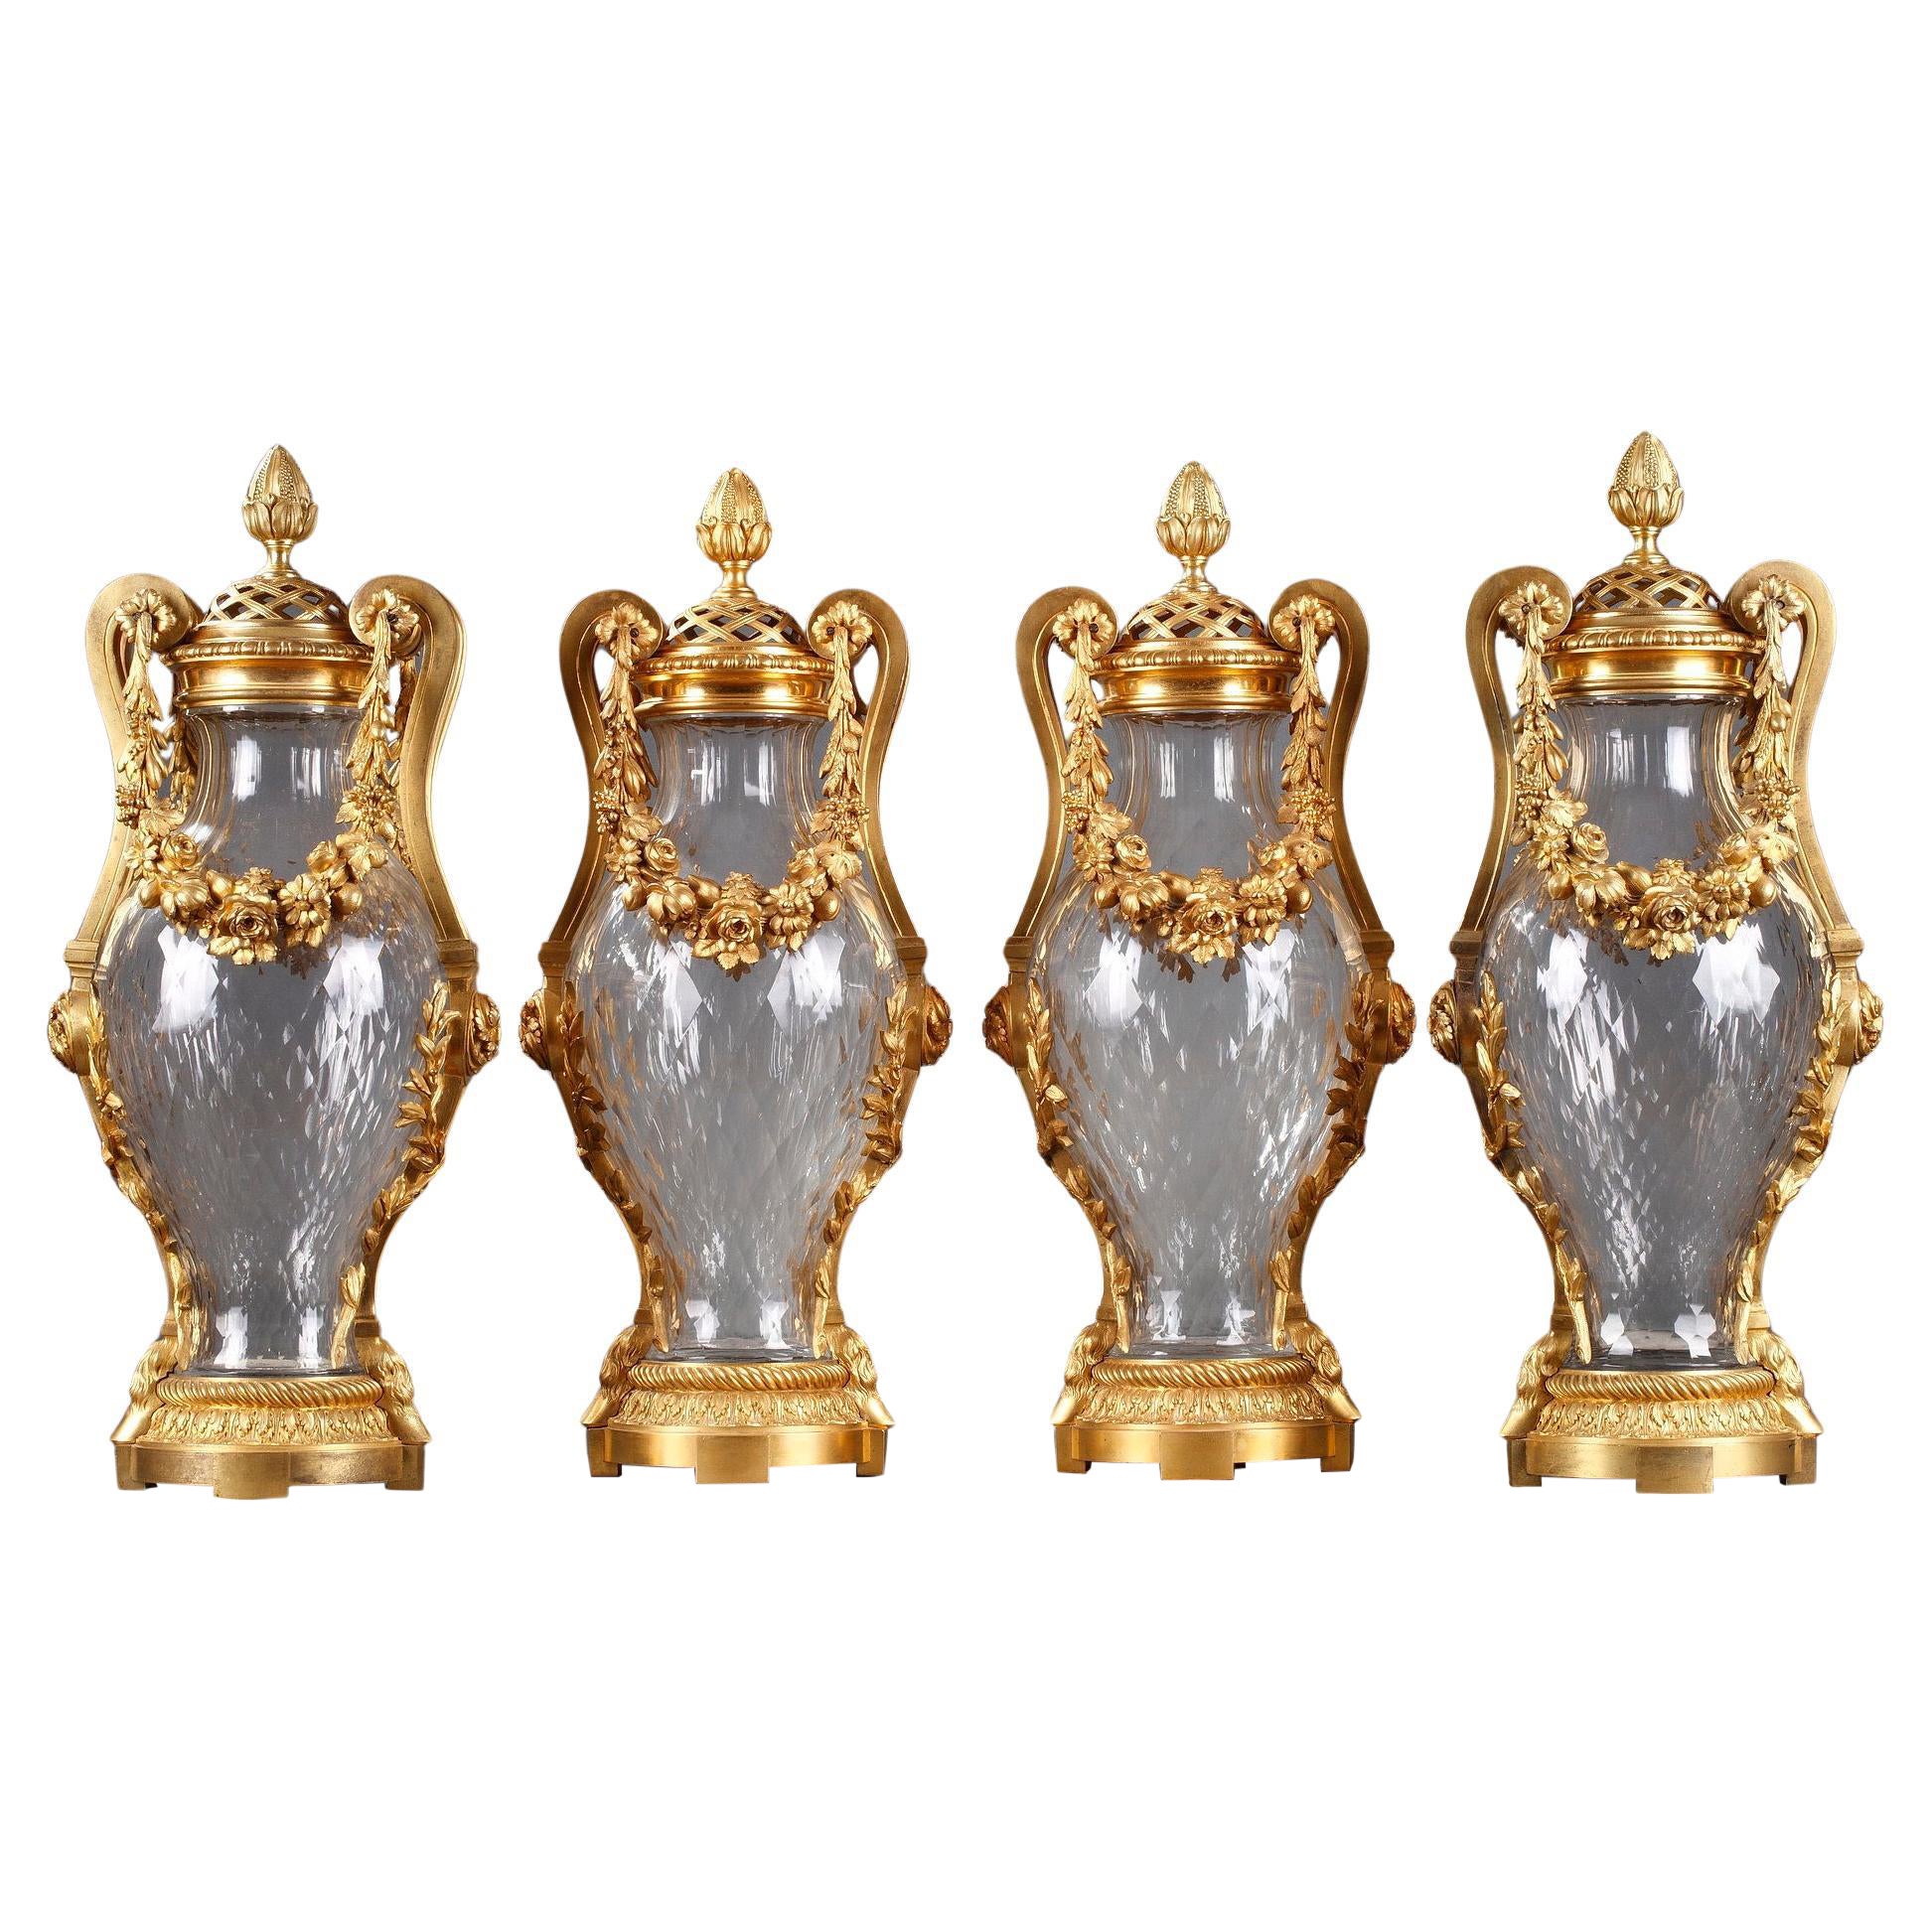 Four Baccarat Crystal Vases, by H. Vian ; H.Dasson & Baccarat, France, C. 1880